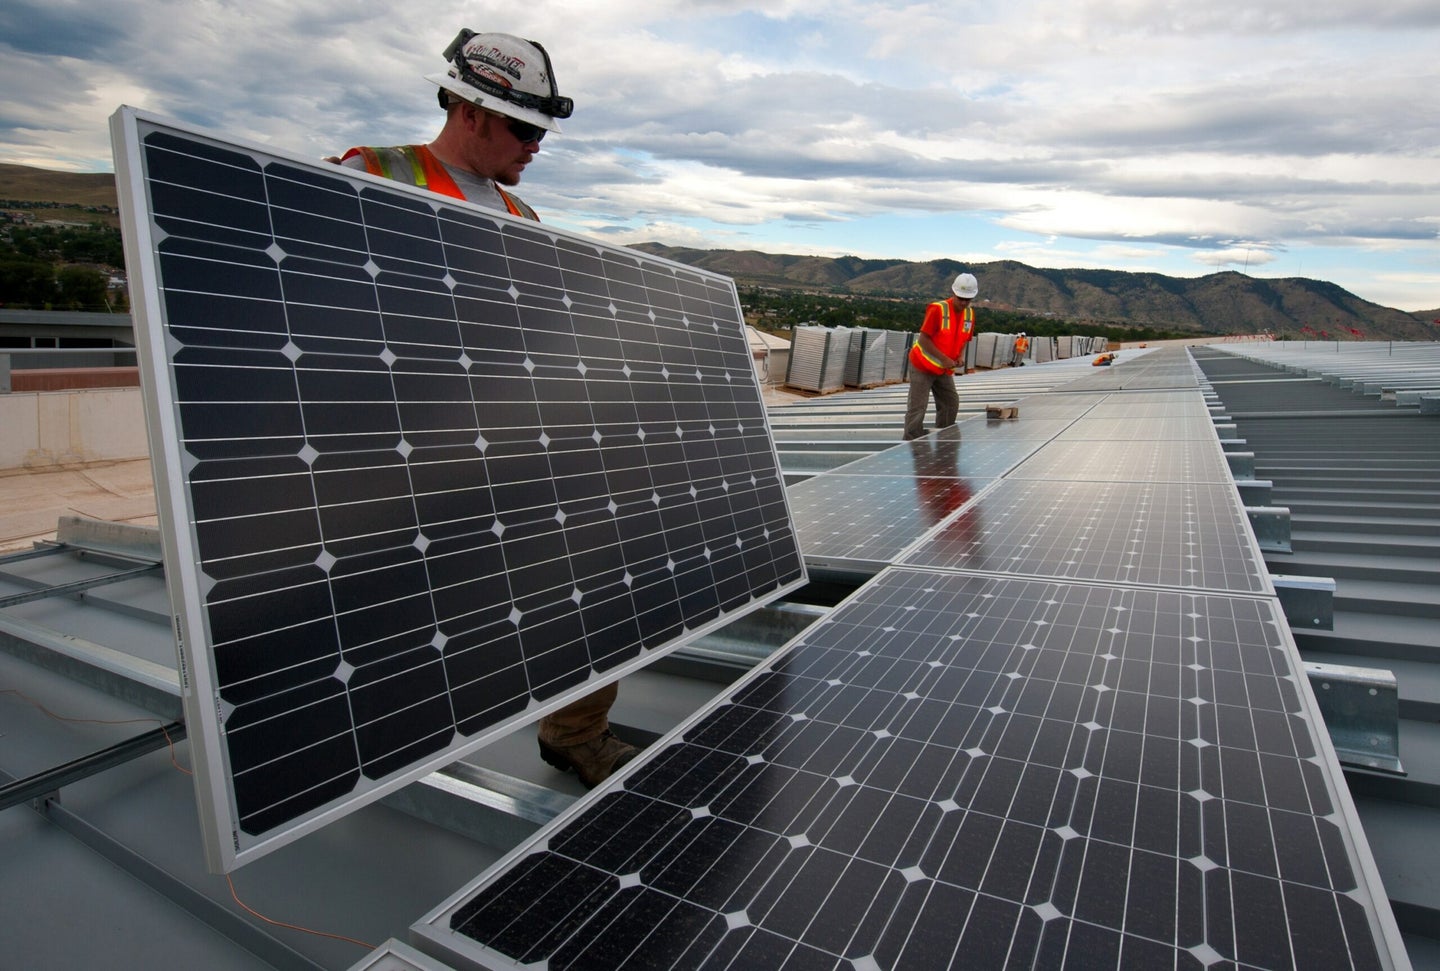 Construction workers install solar panles.